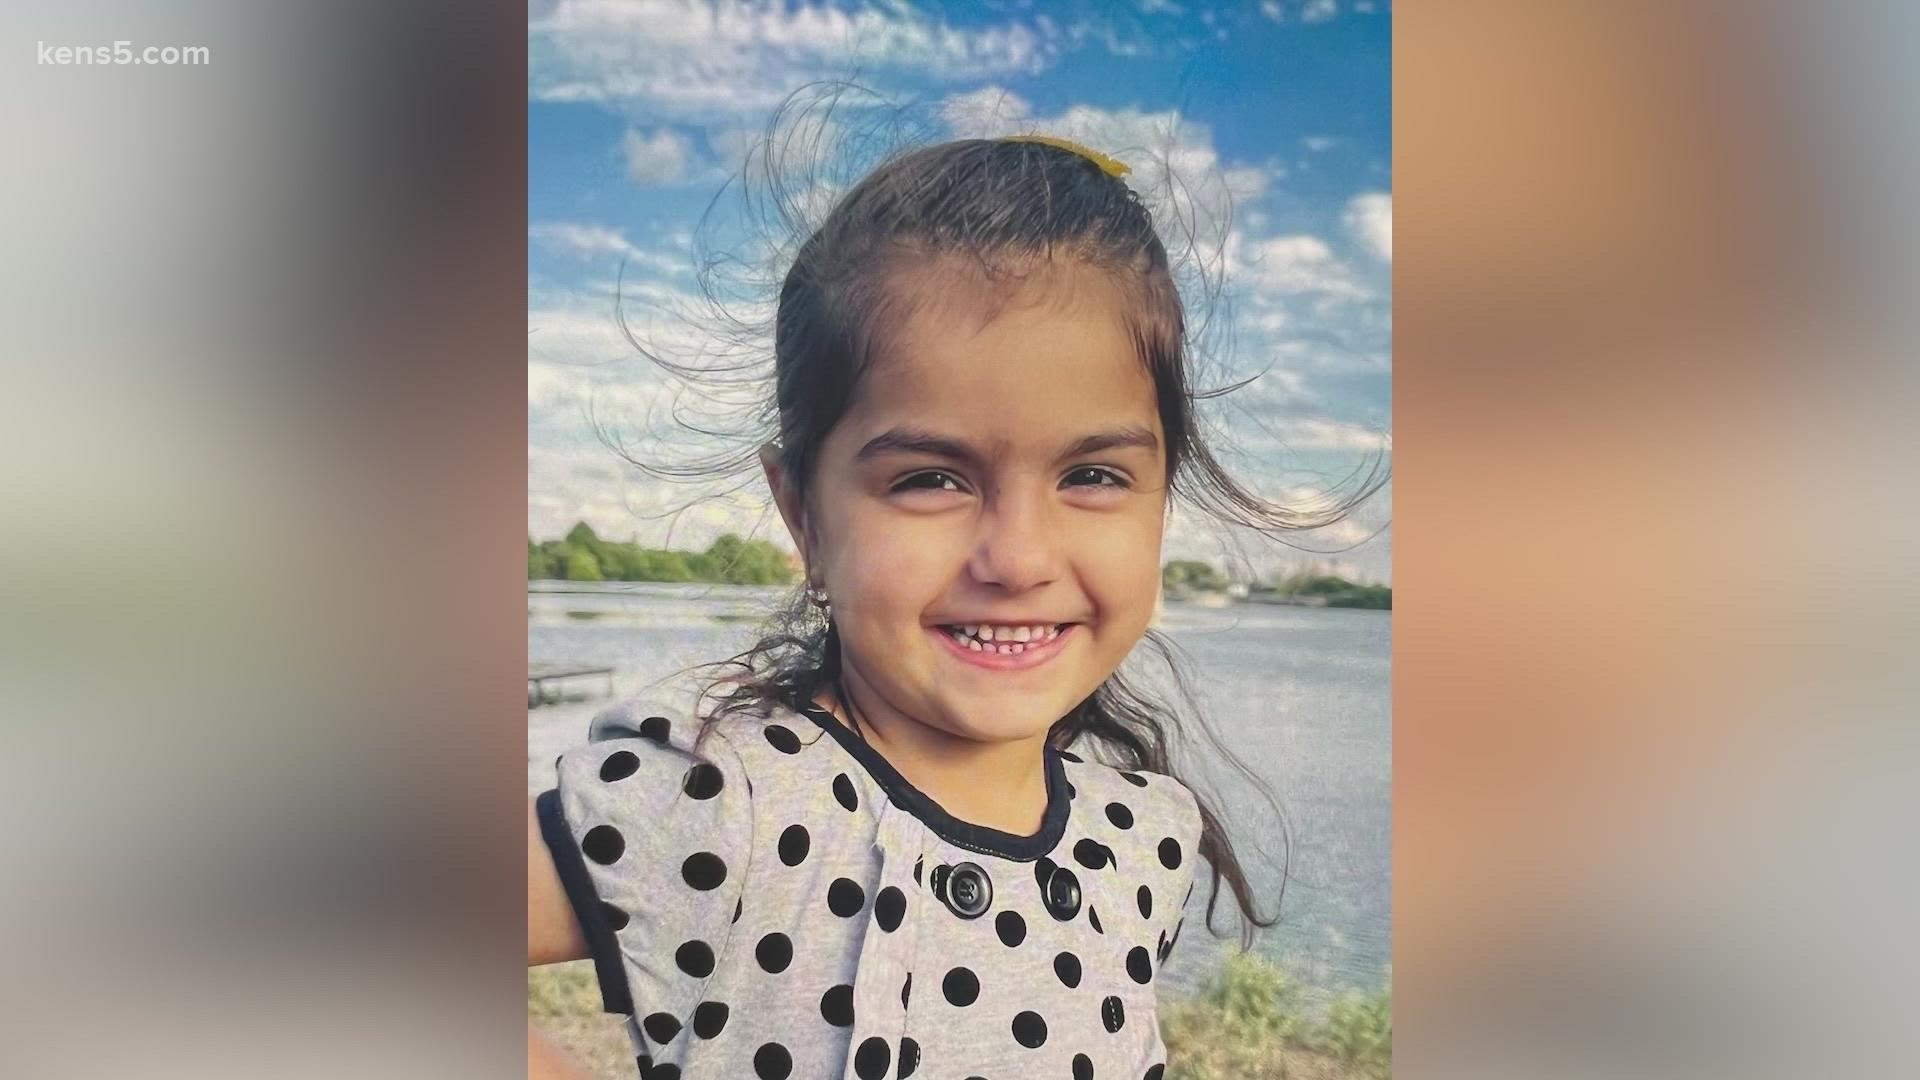 The 3-year-old's family believes she was abducted from their northwest side home, but police are treating her disappearance as a missing persons case.